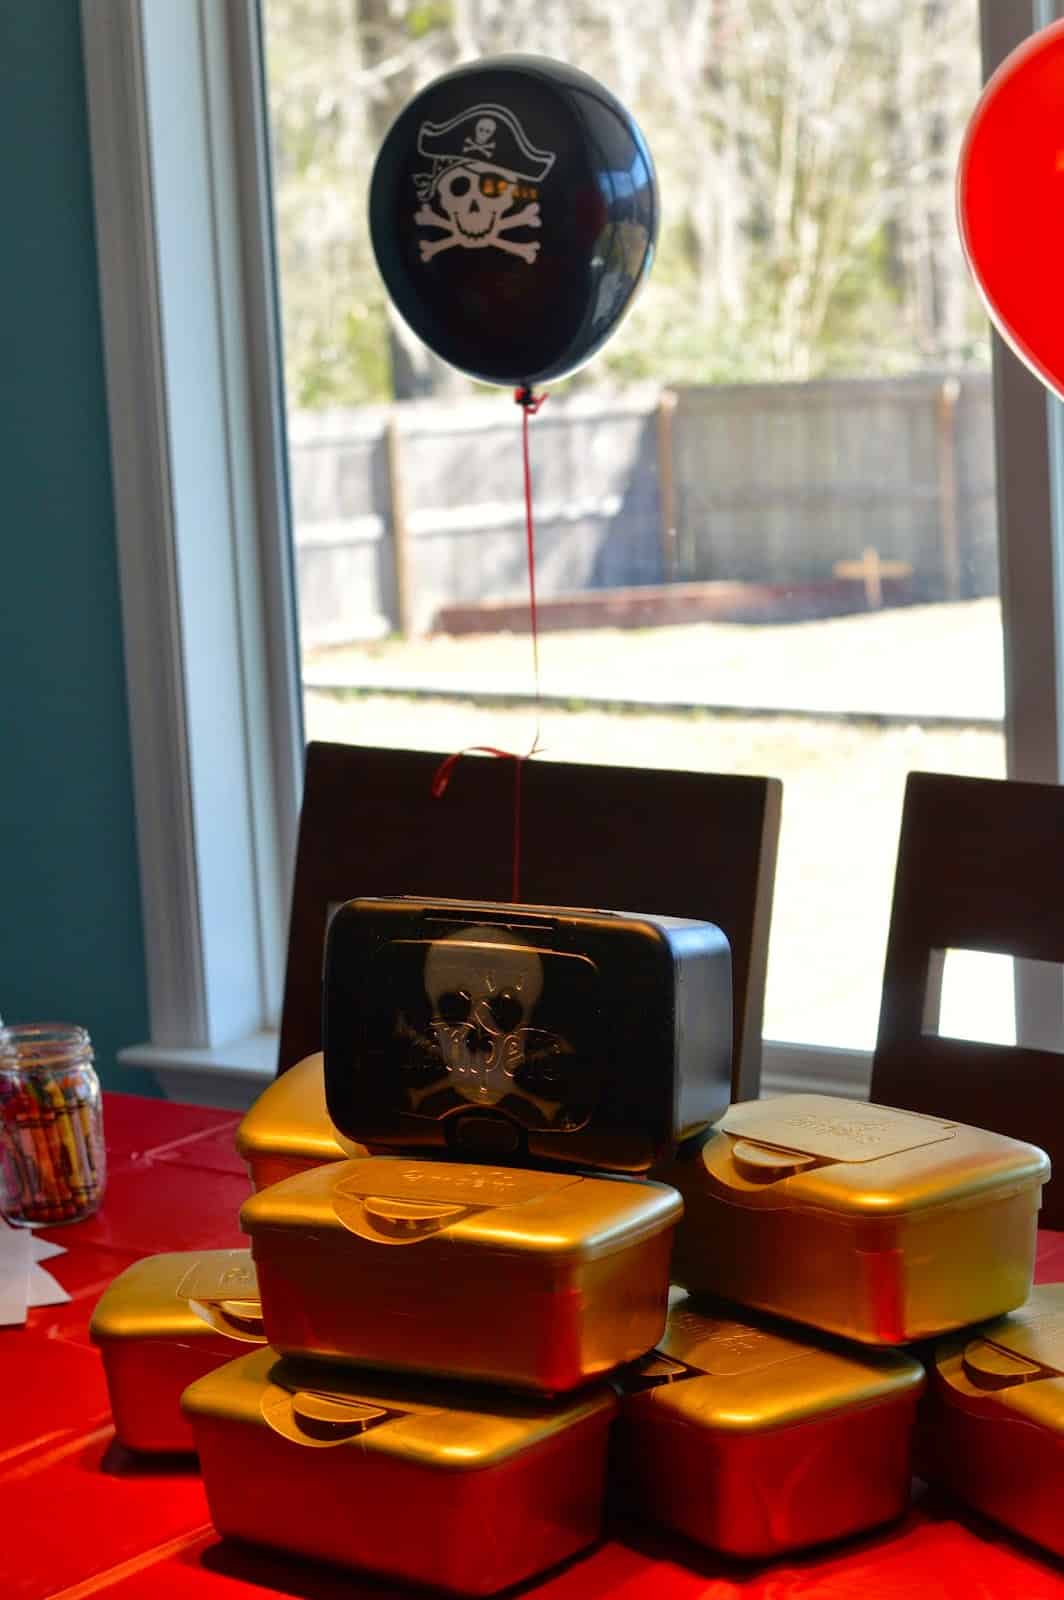 Pirate Themed Birthday Party: DIY Decorations, Food, and More!